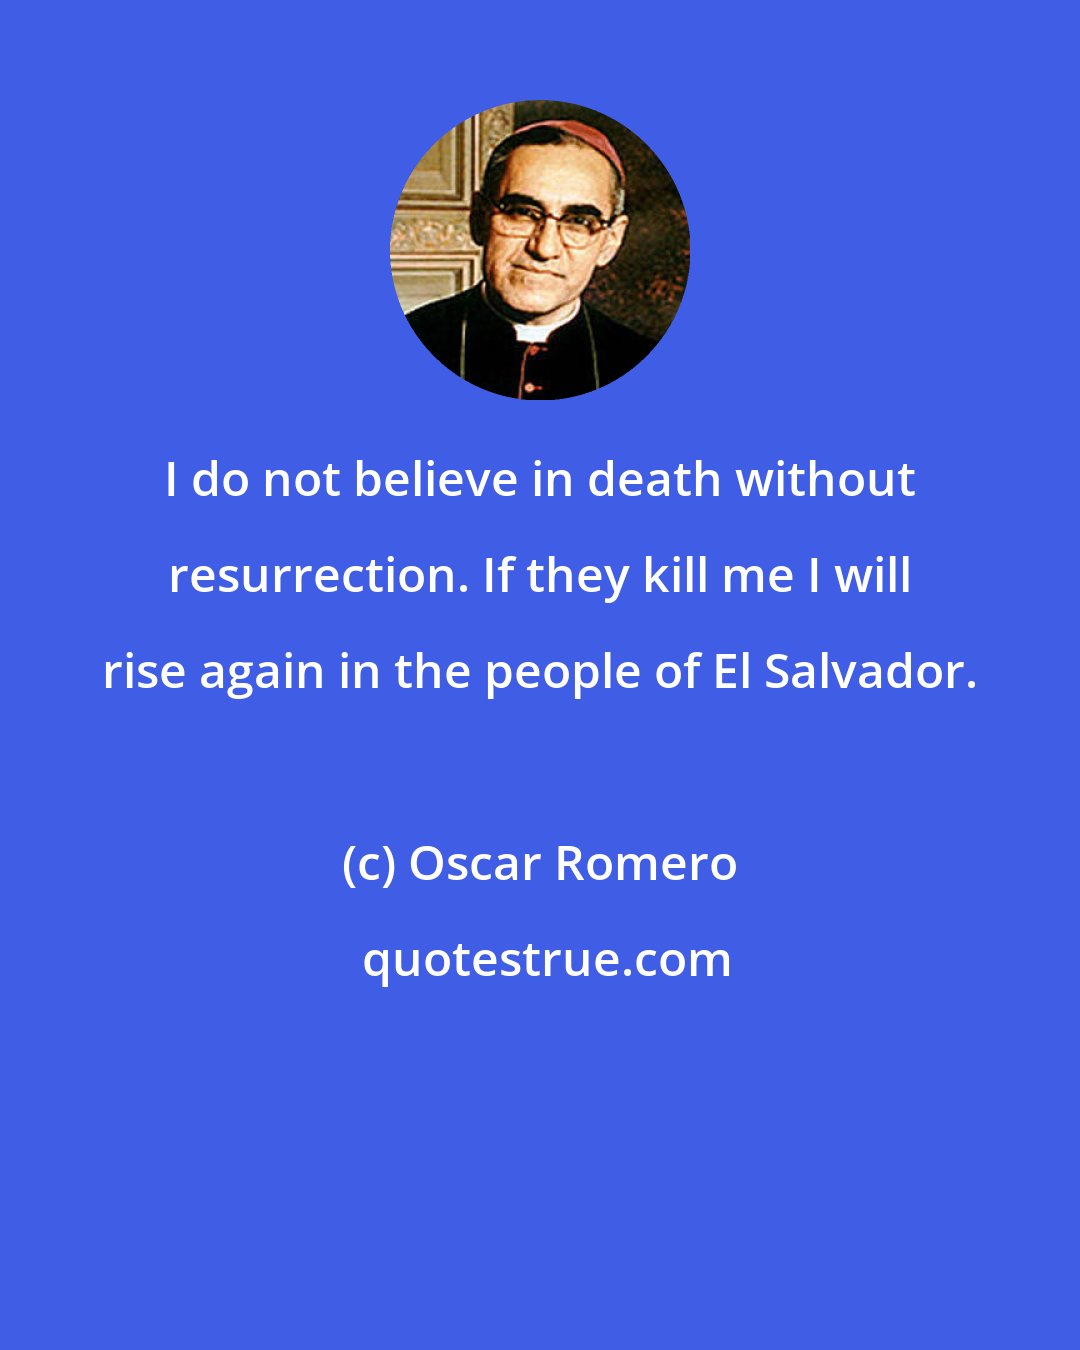 Oscar Romero: I do not believe in death without resurrection. If they kill me I will rise again in the people of El Salvador.